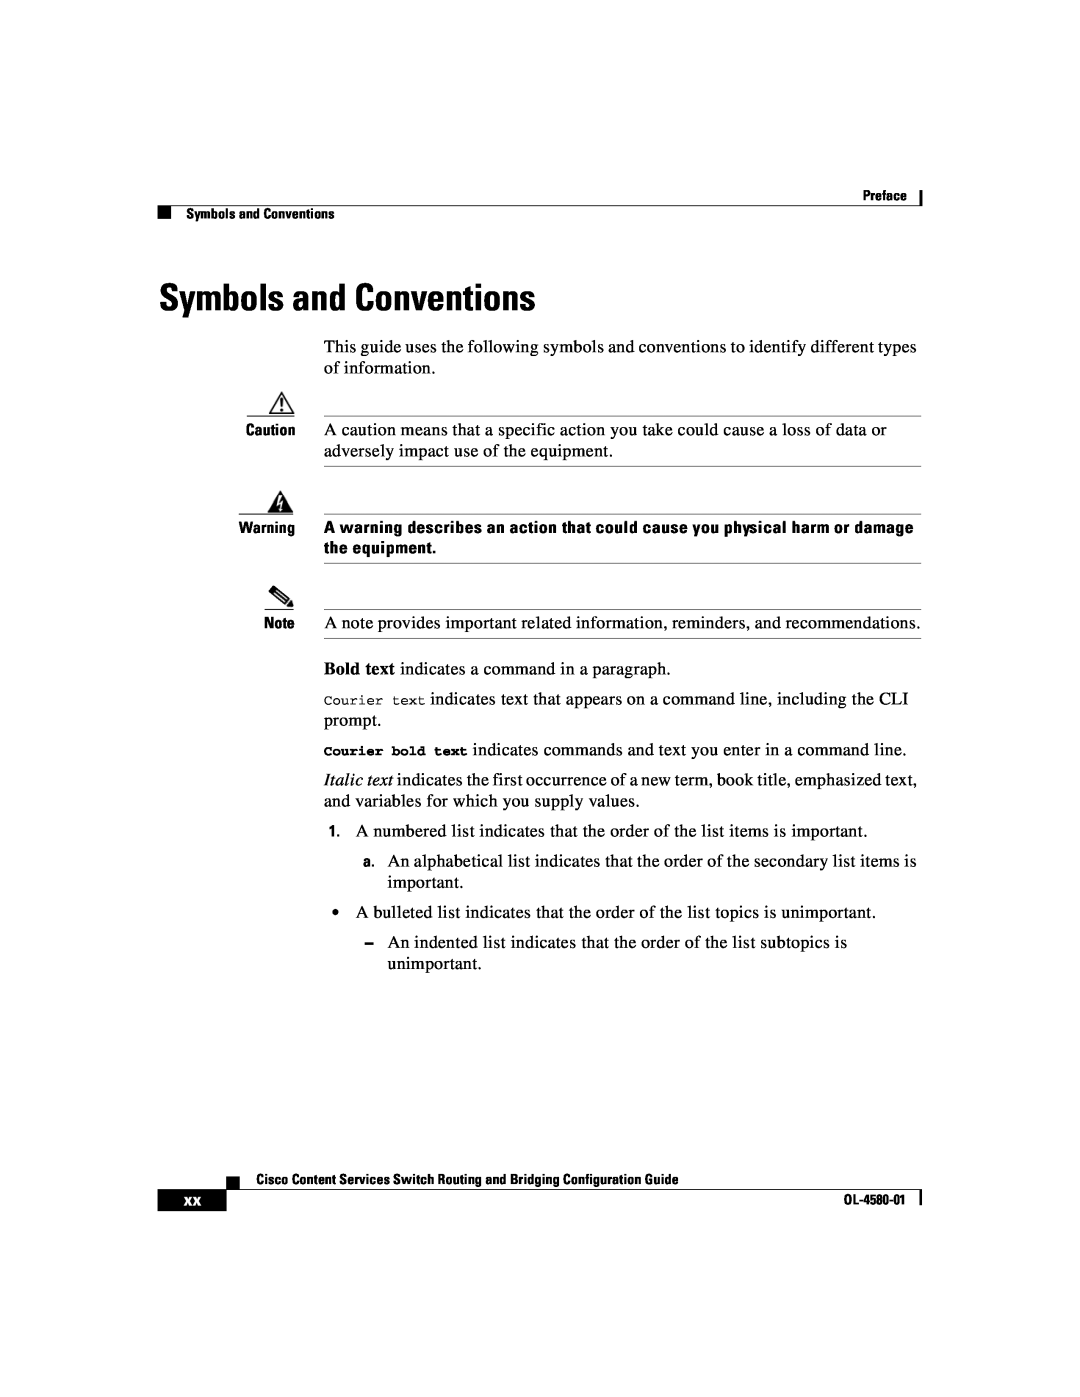 Cisco Systems OL-4580-01 manual Symbols and Conventions 